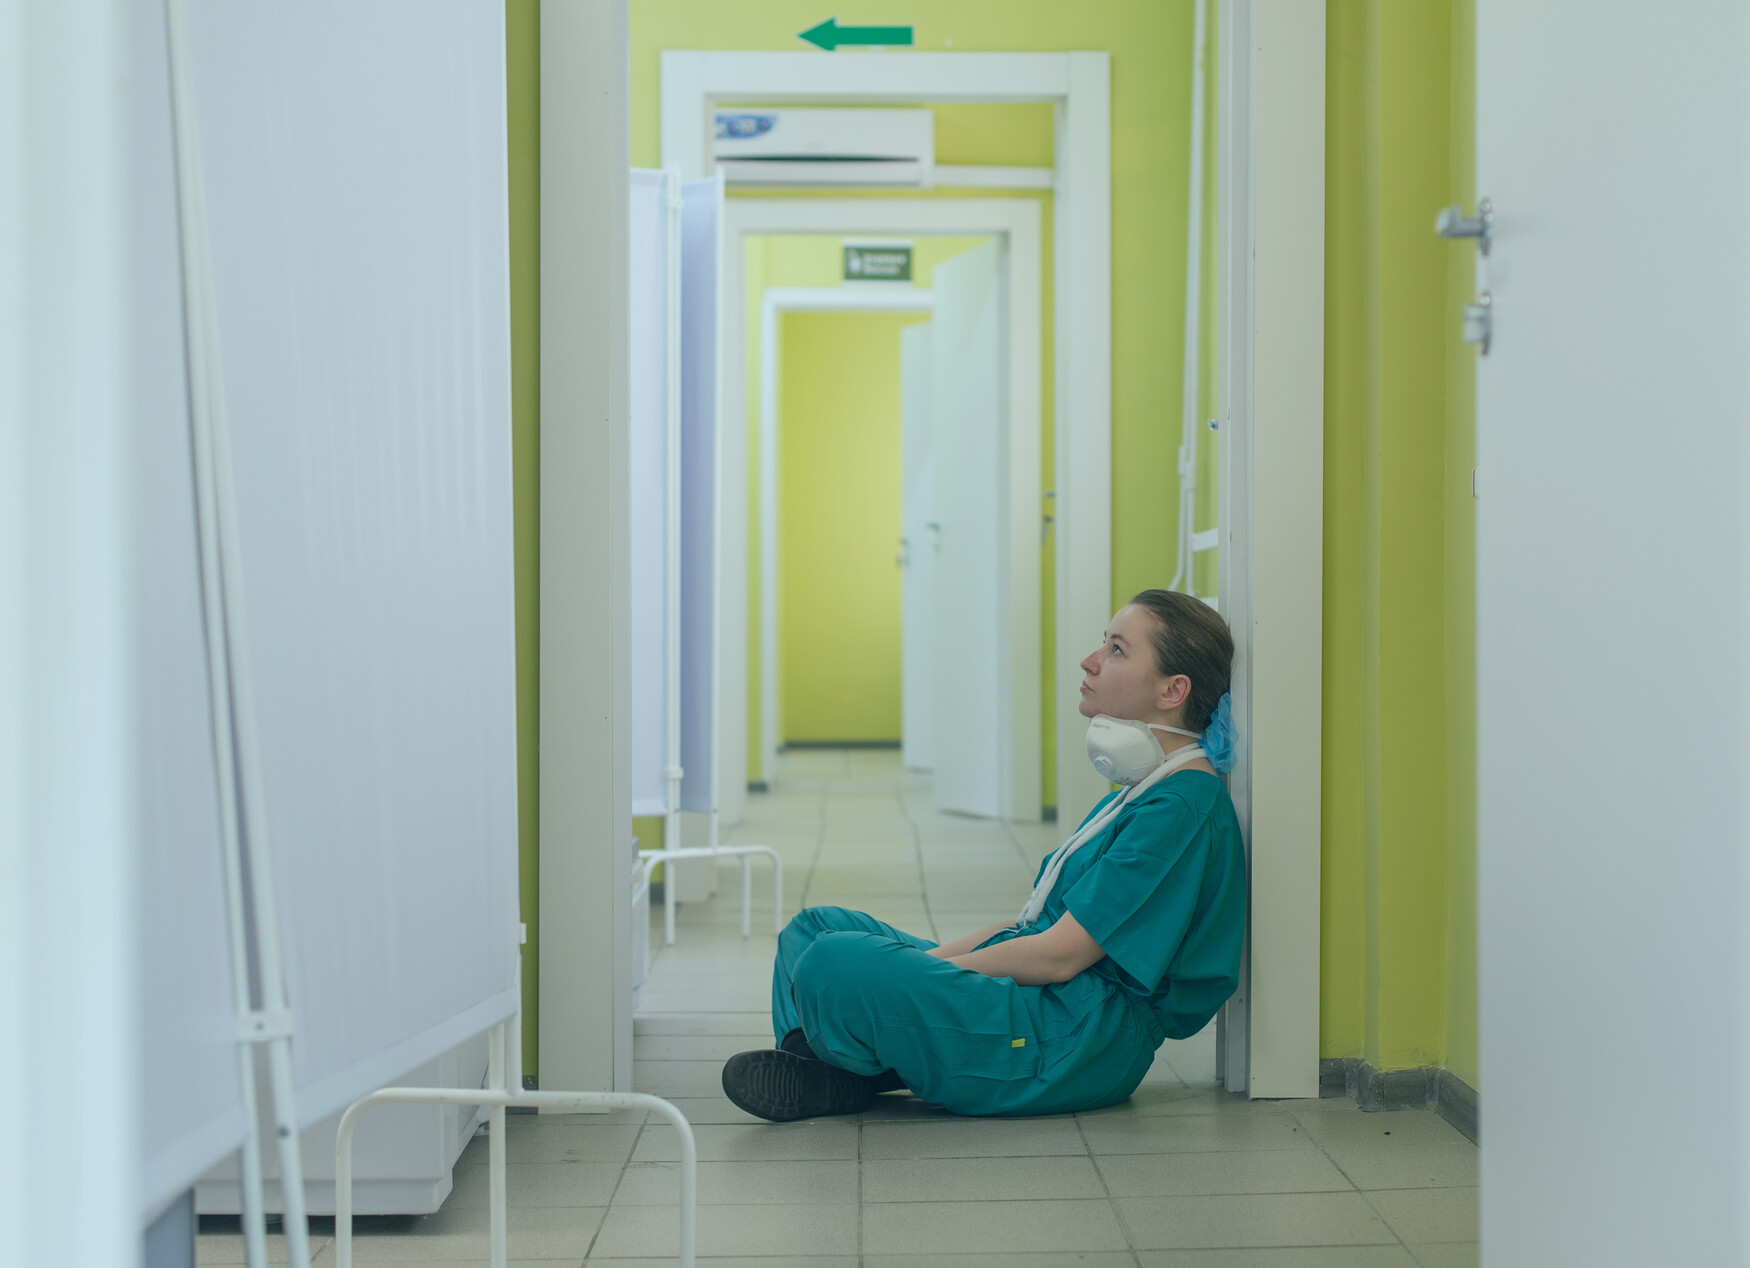 A health care worker in scrubs sits on the floor in a hospital corridor, looking exhausted